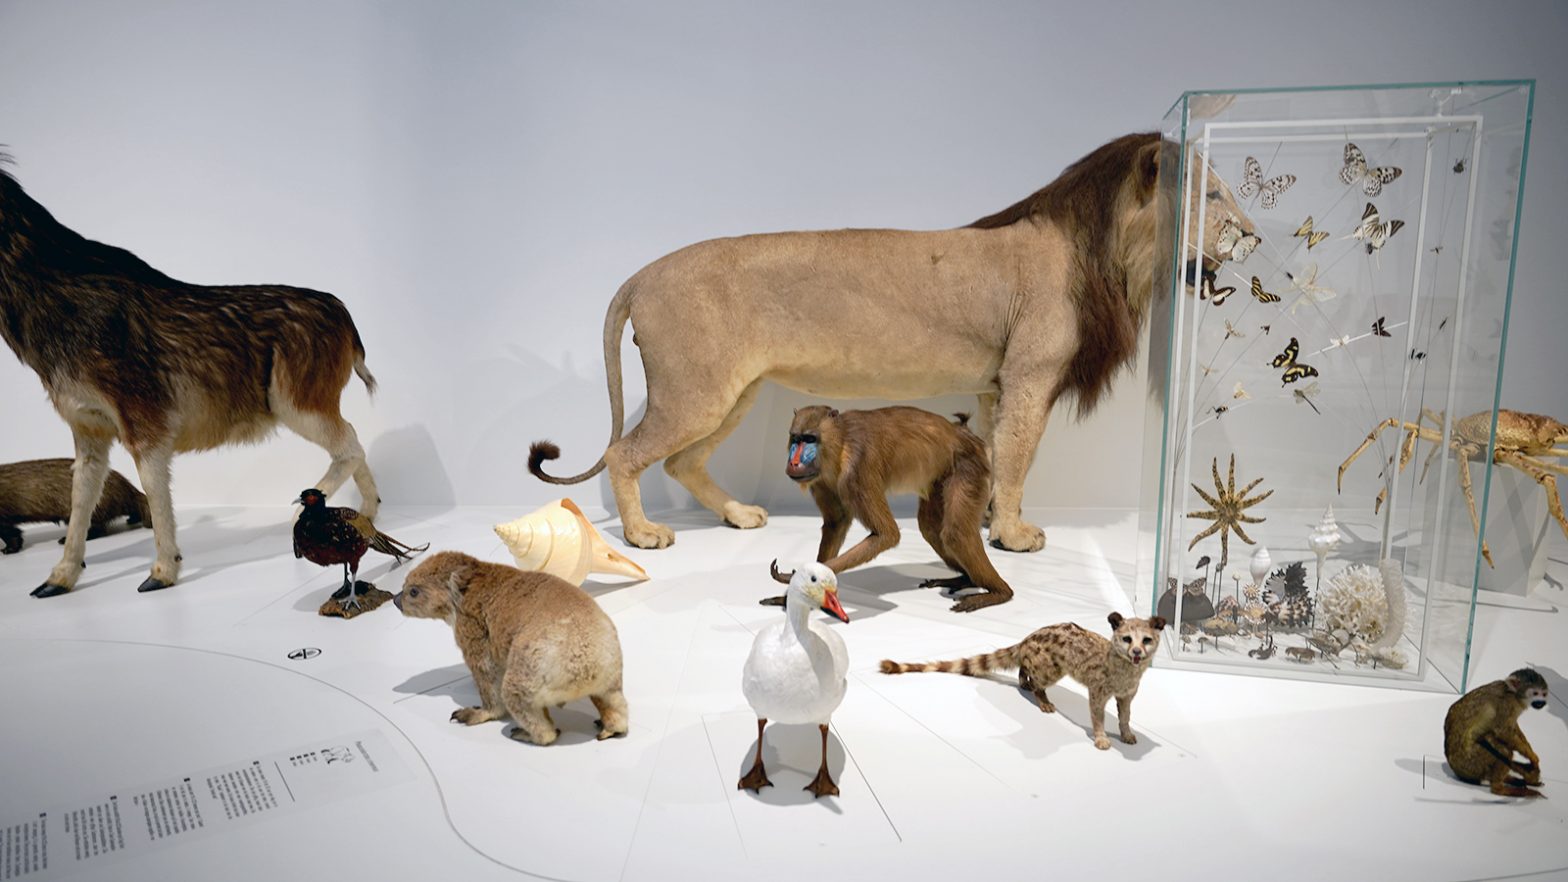 To diorama or not to diorama? The representation of nature at the Museum of  Natural Sciences in Brussels. – The Appeal of the Unreal